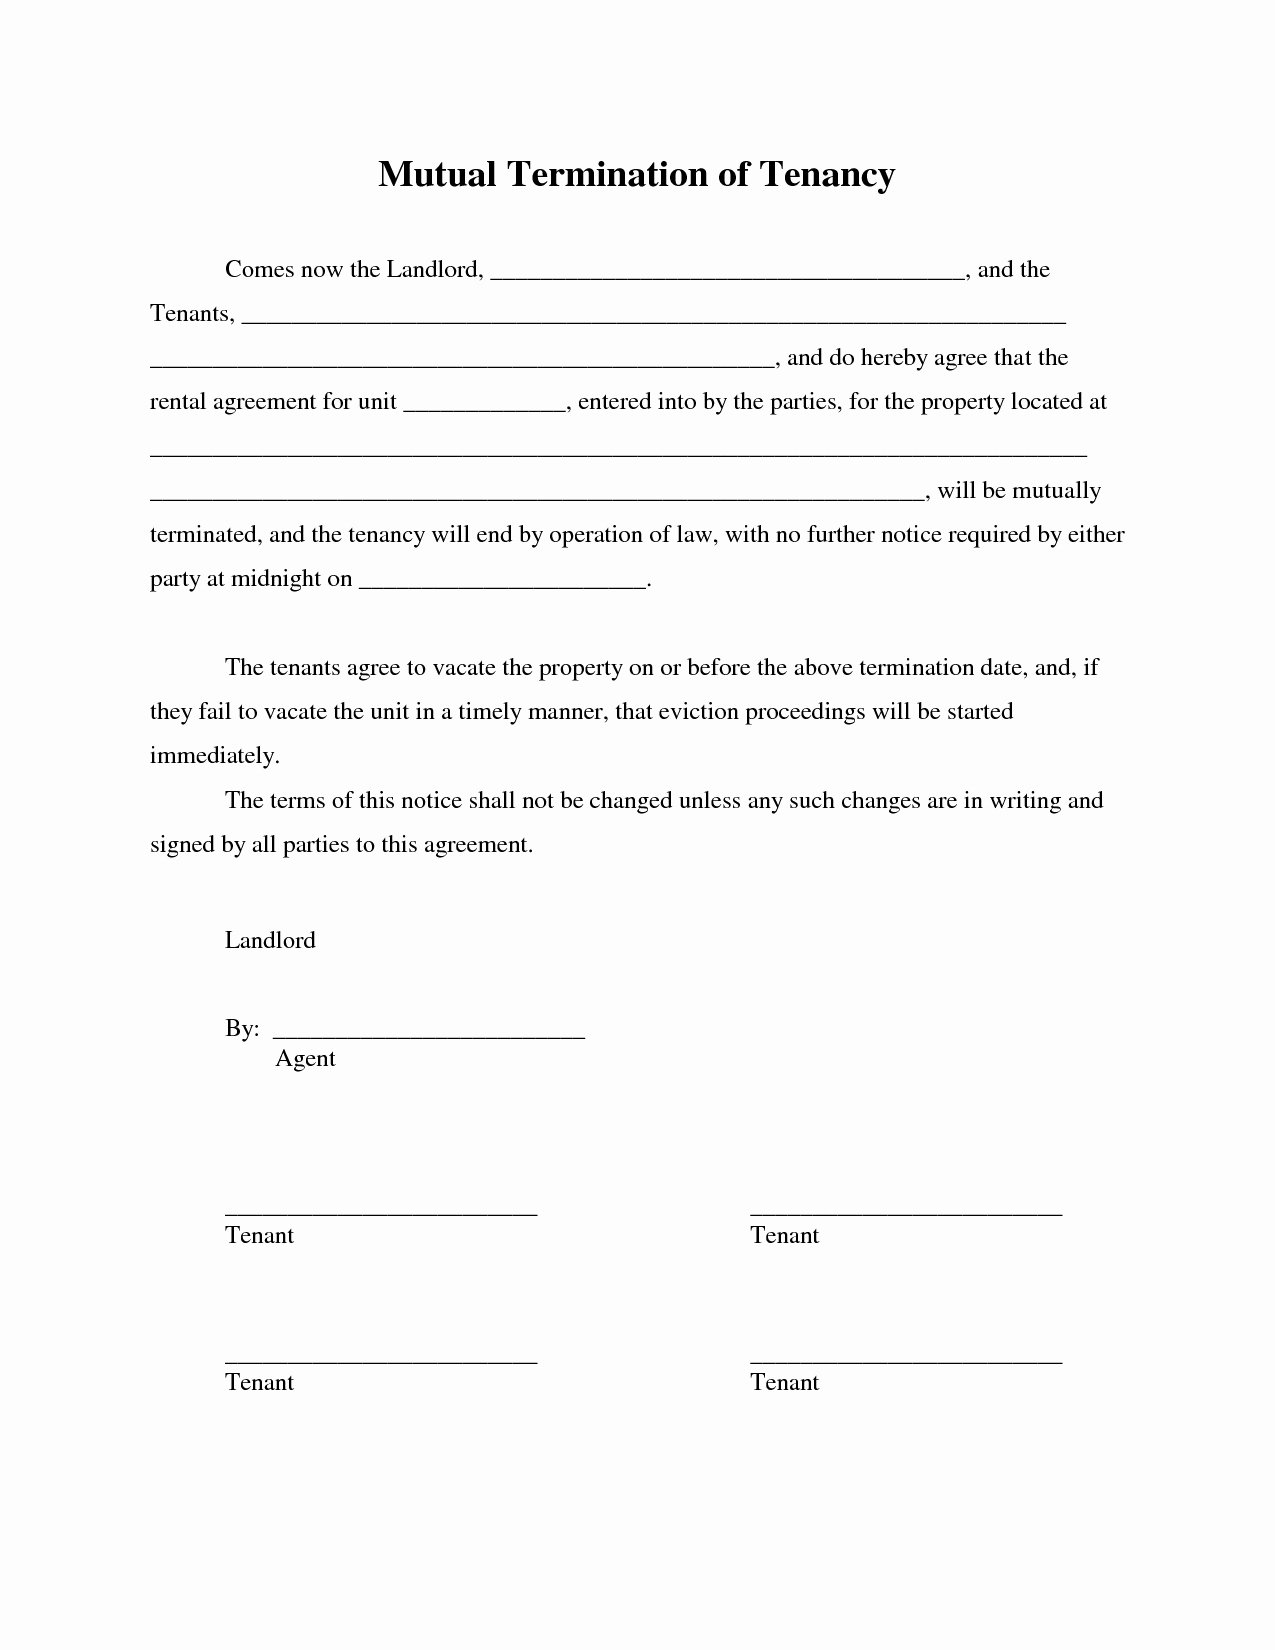 Letter Of Intent to Lease Template Beautiful Mercial Lease Letter Intent Template Sample